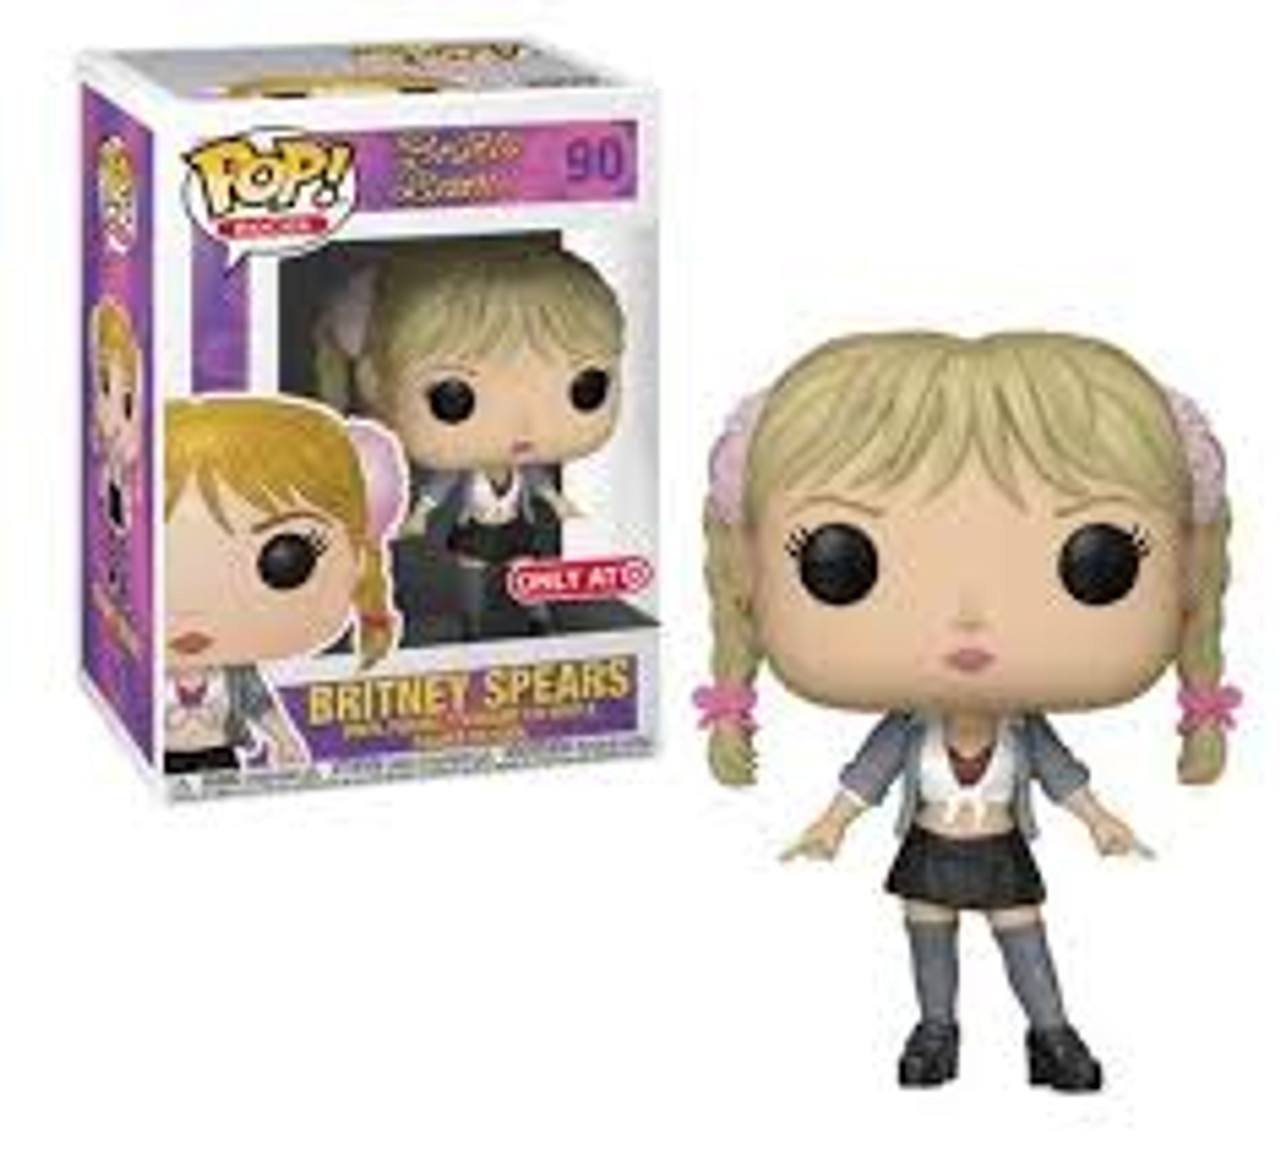 Funko Pop! ROCKS BRITNEY SPEARS CIRCUS #262 In Stock!! Ships Fast!!